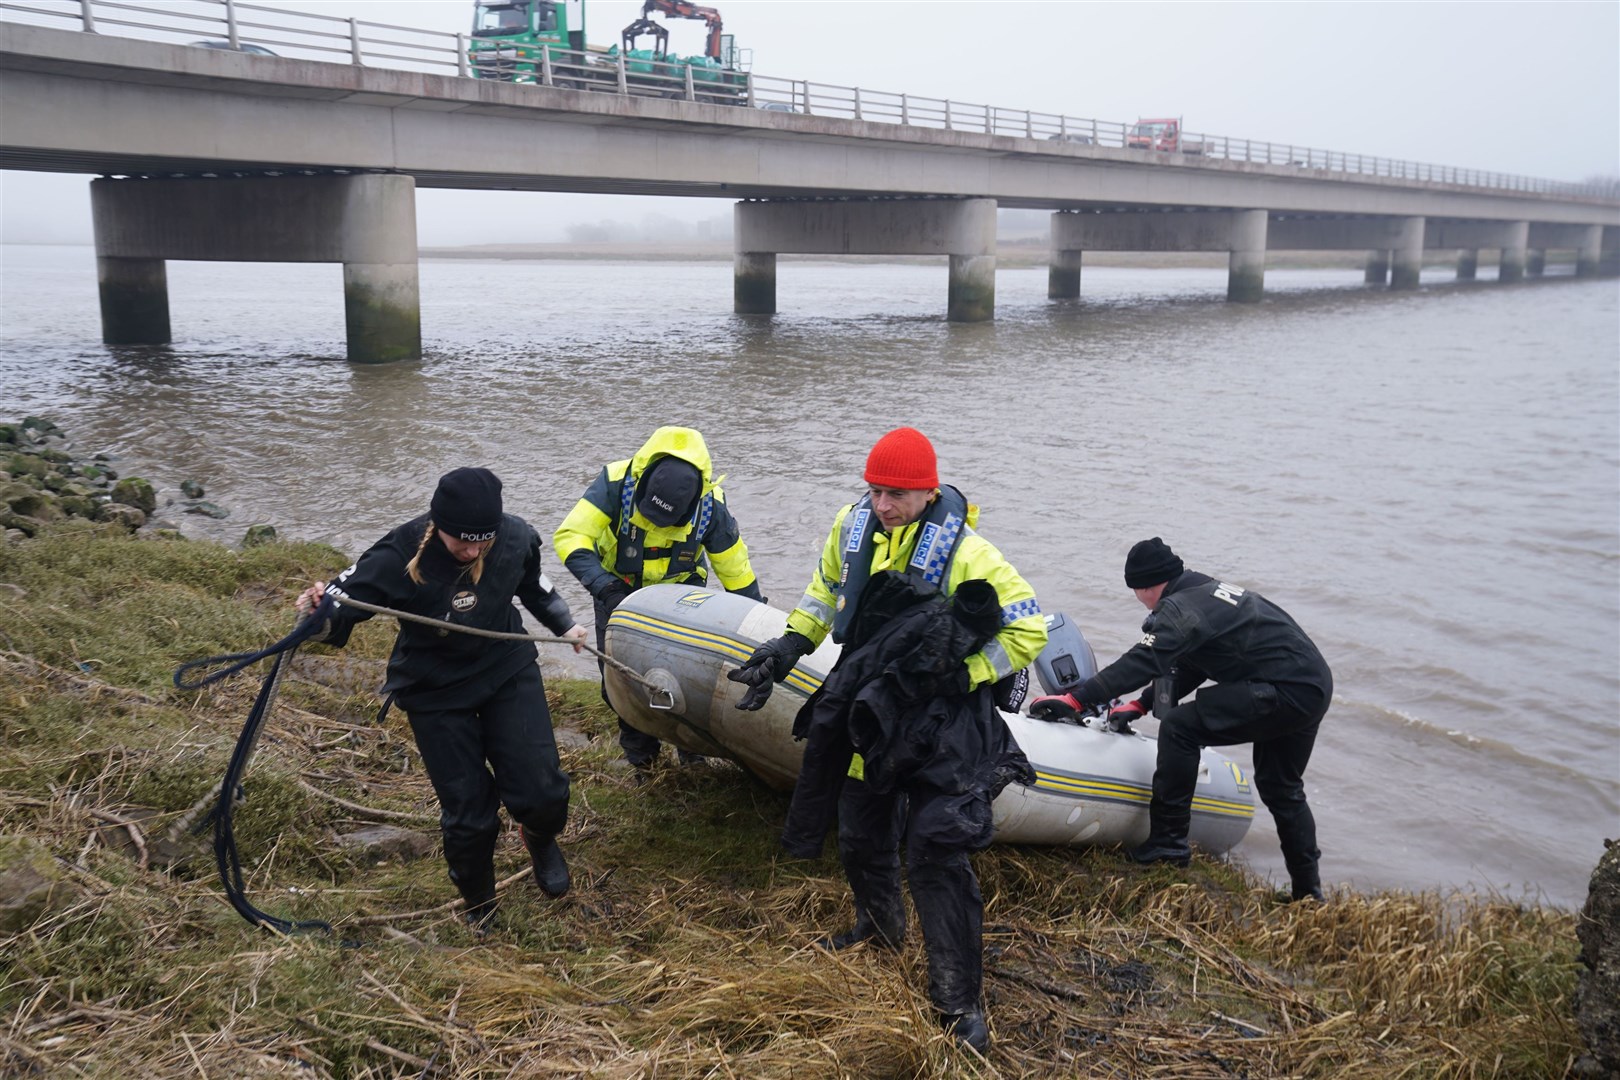 The police Search and Rescue team on the river bank near to Shard Bridge on the River Wyre (Owen Humphreys/PA)